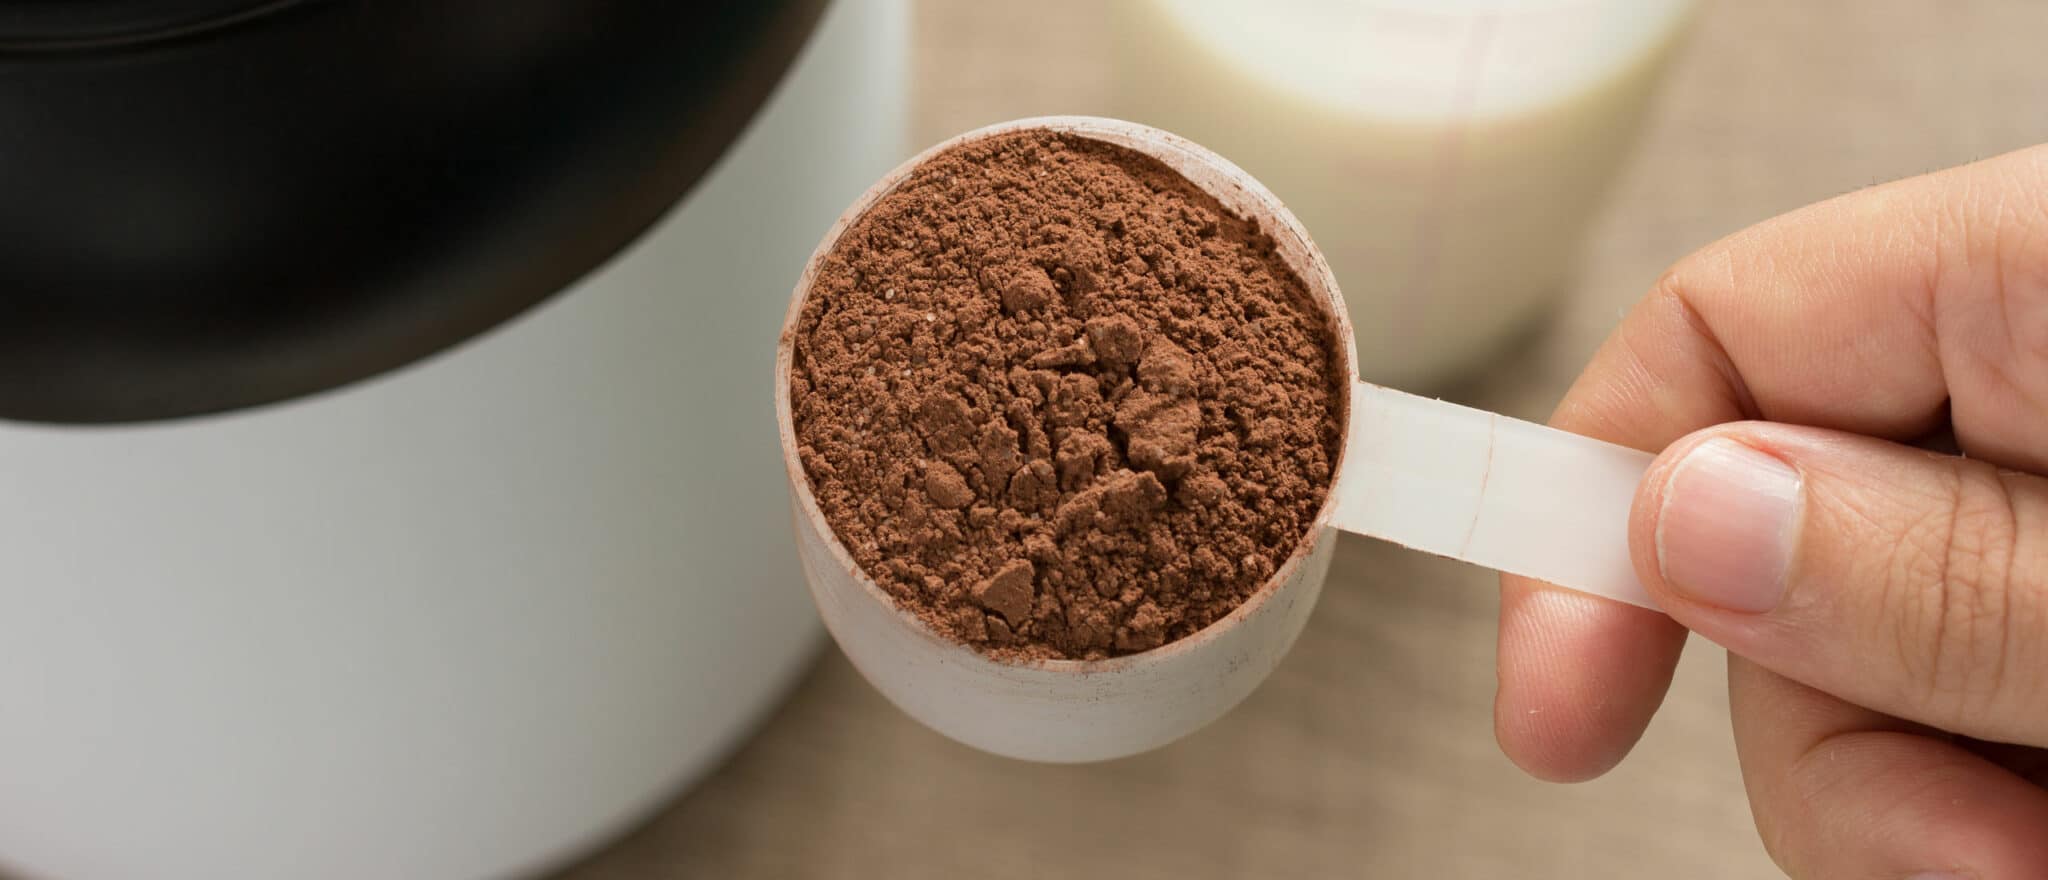 Looking for a New Protein Powder? Here Are 10 of the Best